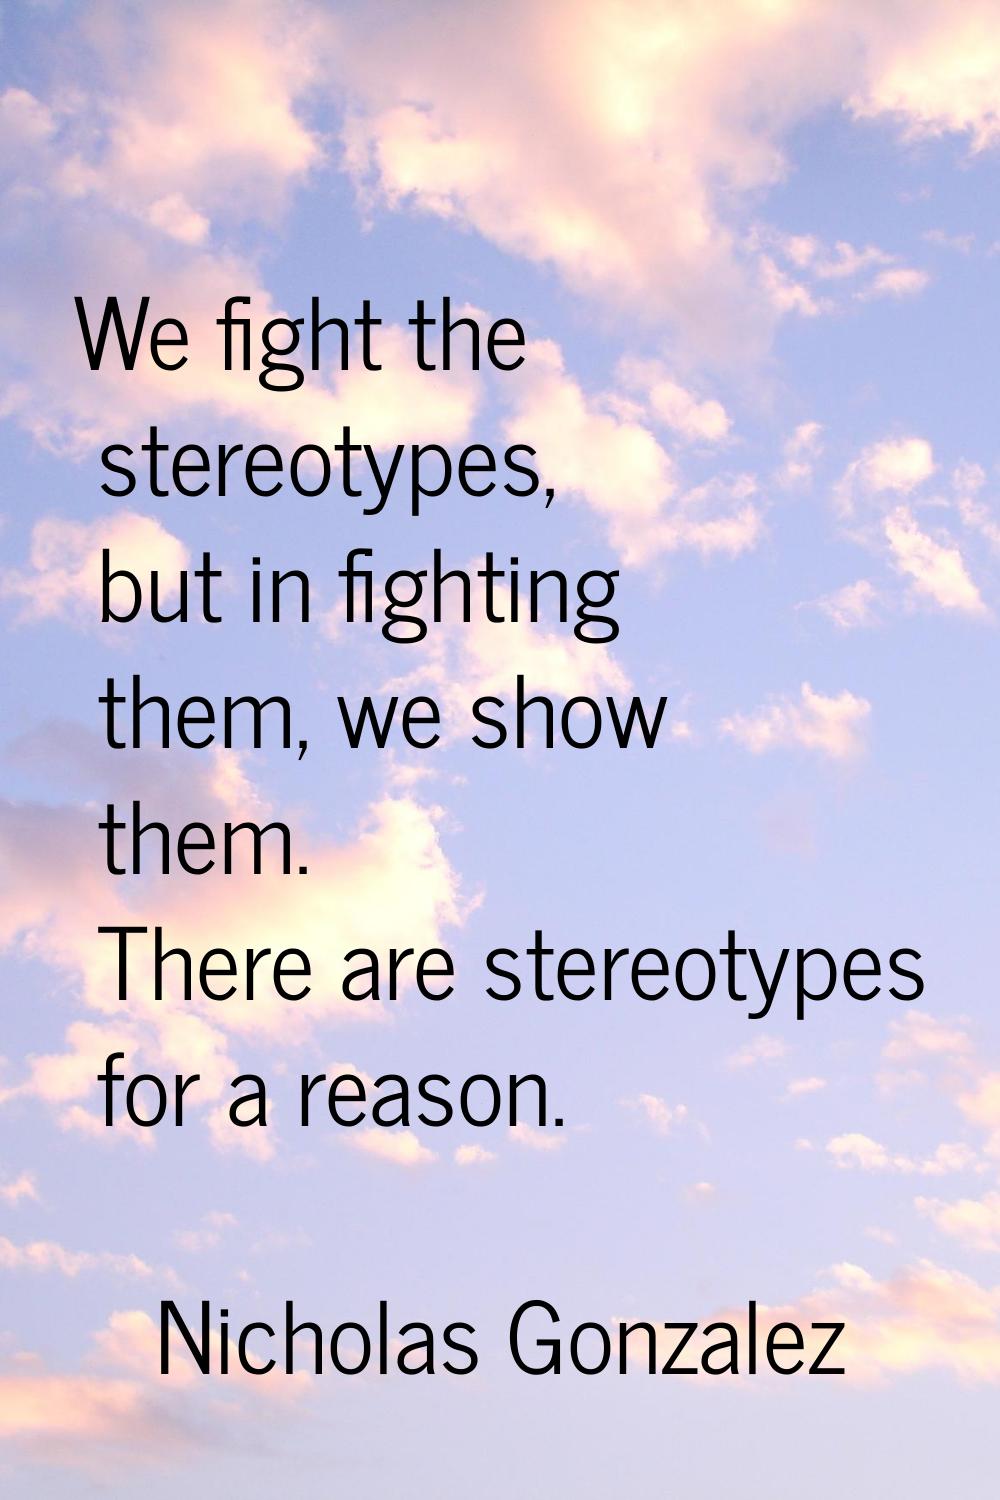 We fight the stereotypes, but in fighting them, we show them. There are stereotypes for a reason.